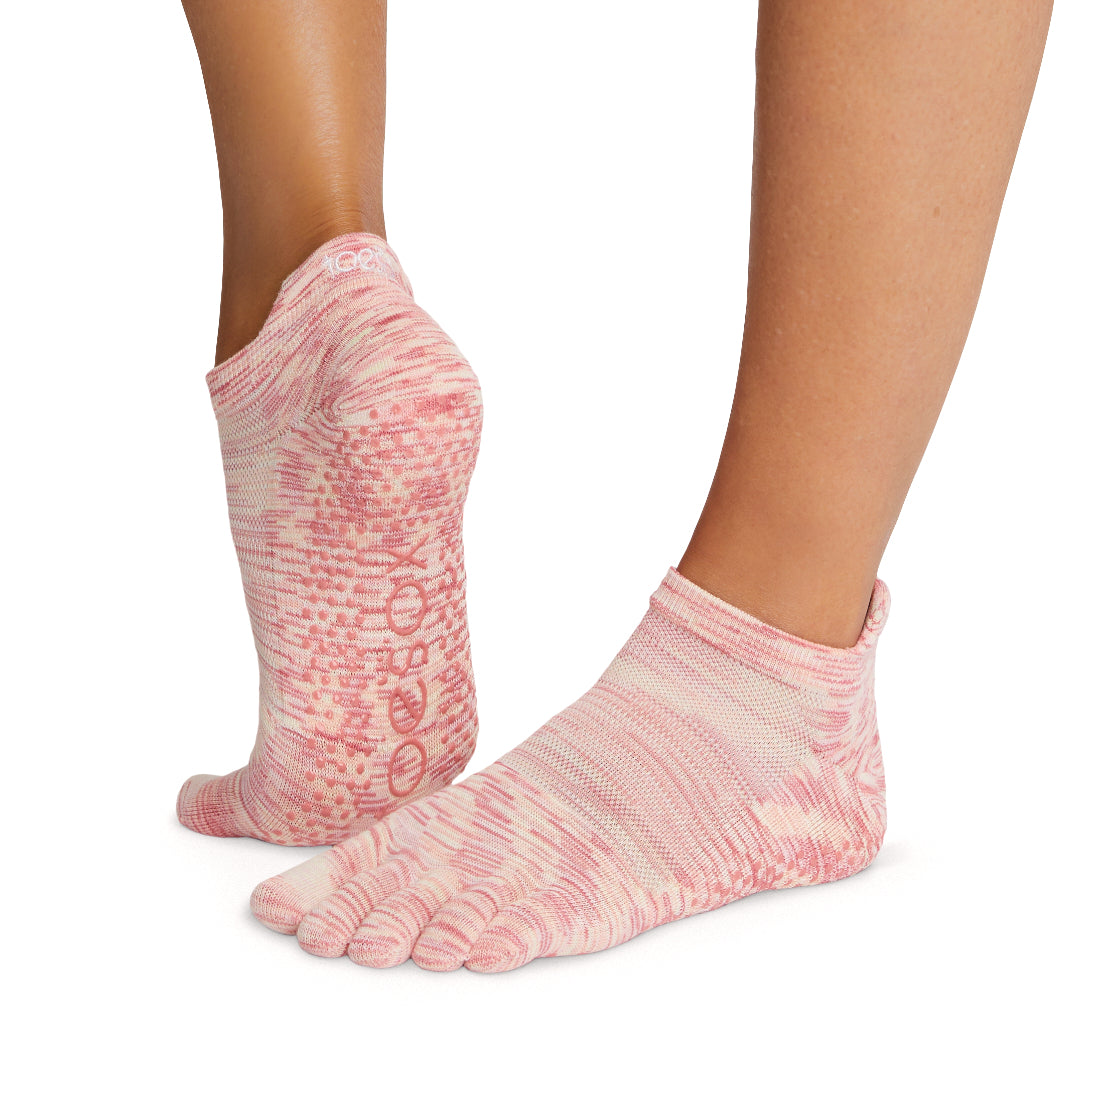 ToeSox Grip Socks in Hong Kong  T8 Fitness Tagged Yoga Socks - T8 Fitness  - Asia Yoga, Pilates, Rehab, Fitness Products